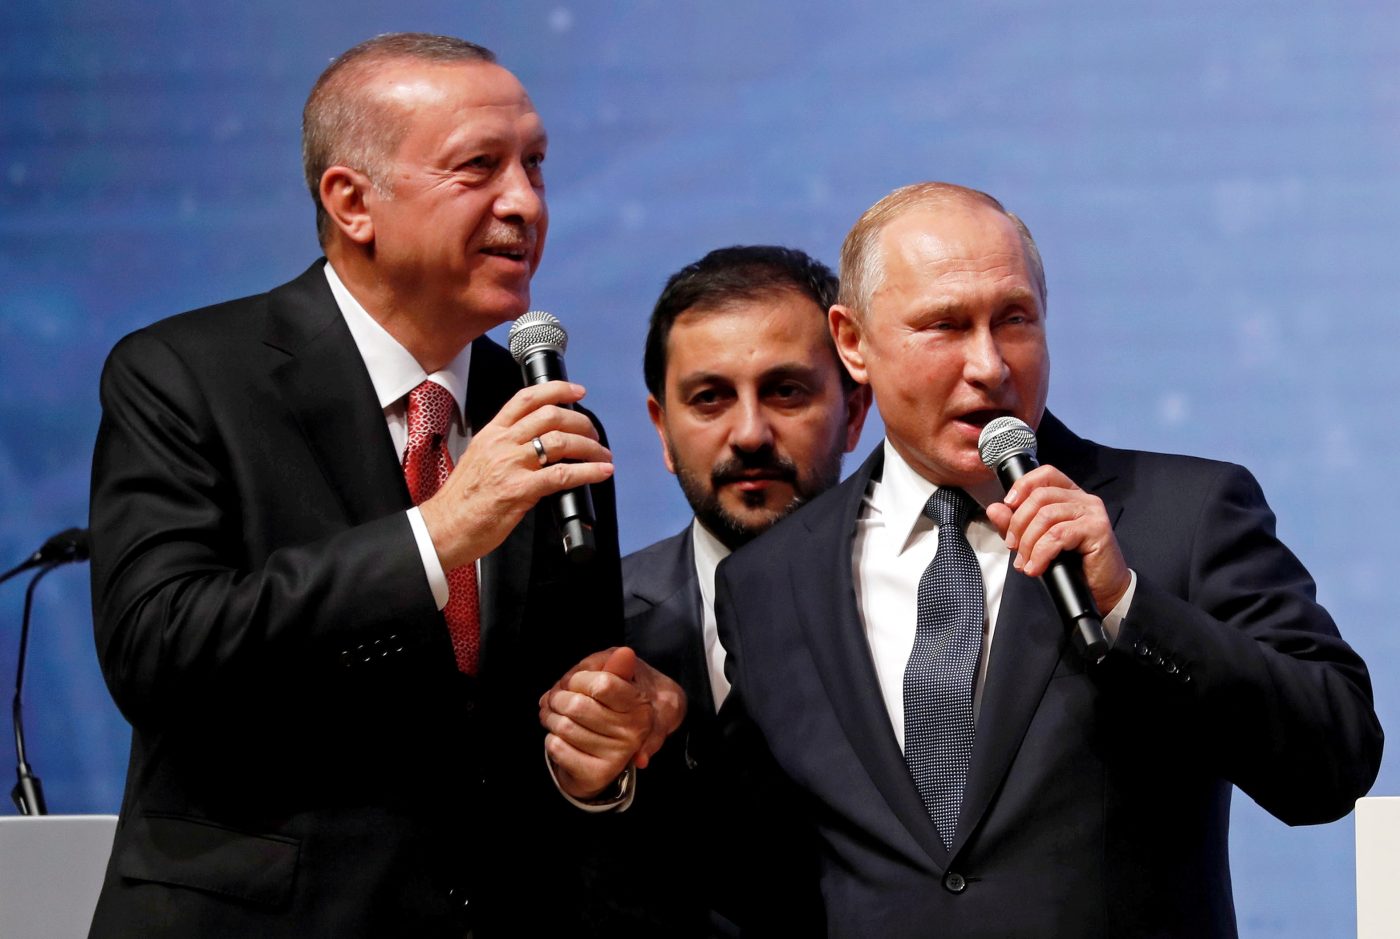 Photo: Turkish President Tayyip Erdogan and his Russian counterpart Vladimir Putin talk during a ceremony to mark the completion of the sea part of the TurkStream gas pipeline, in Istanbul, Turkey November 19, 2018. Credit: REUTERS/Murad Sezer